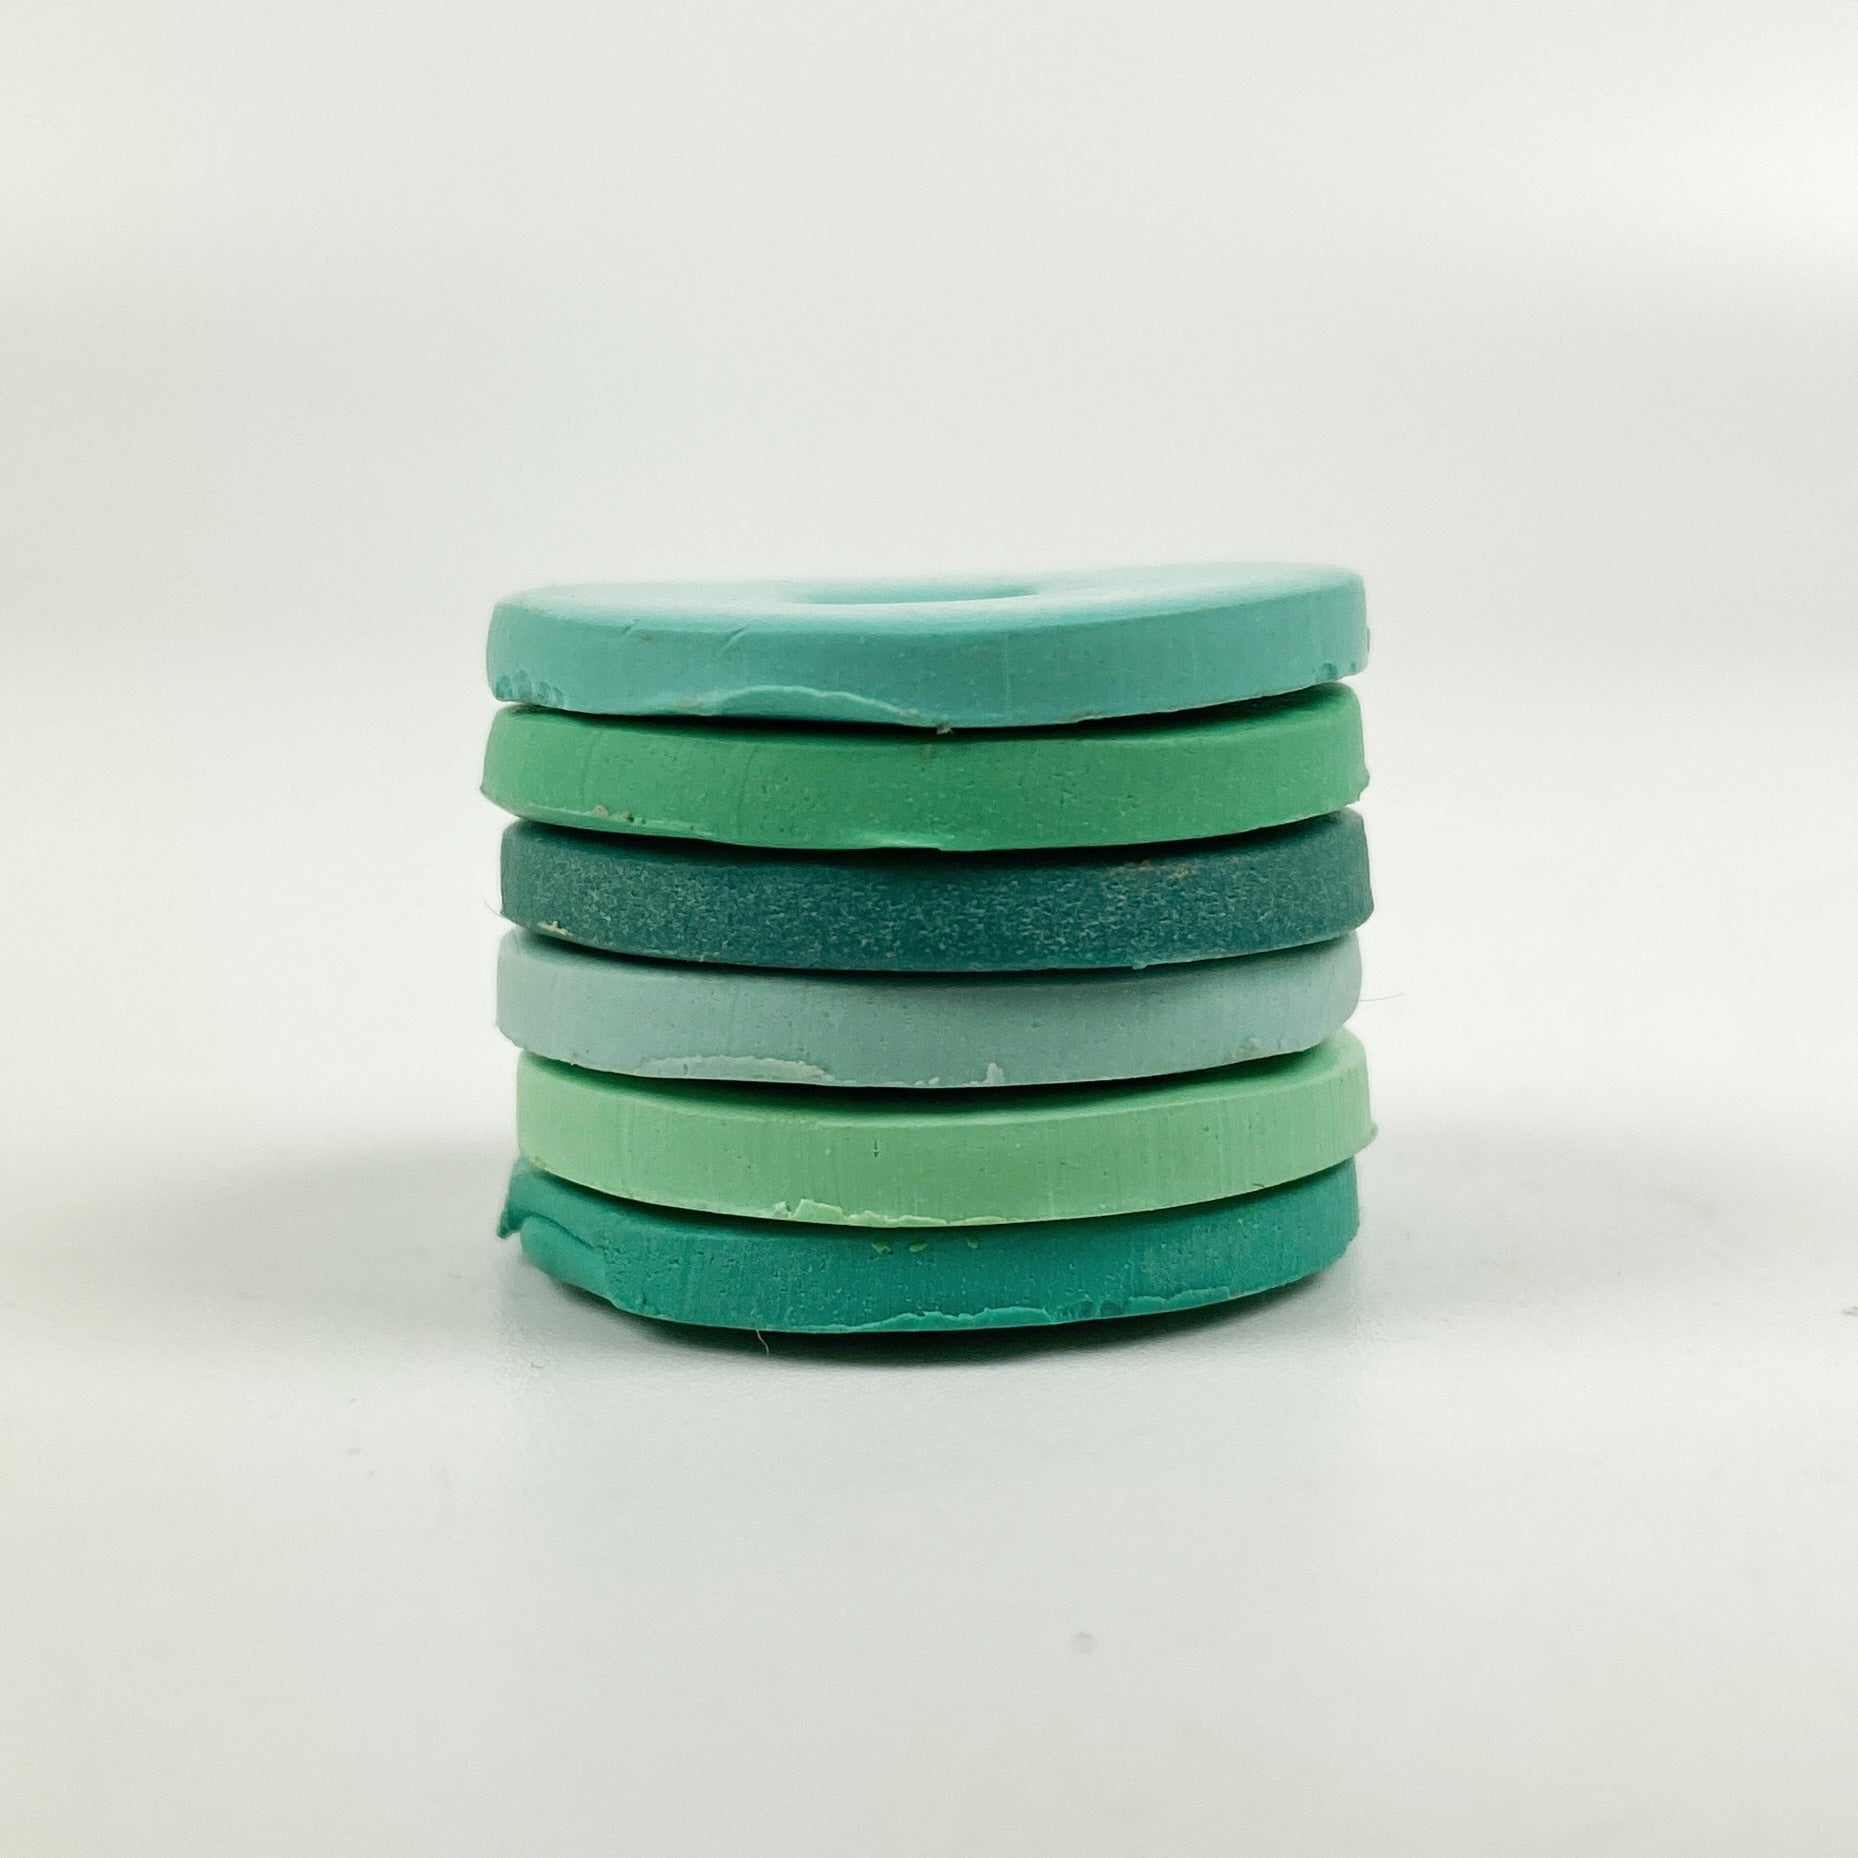 Tropical Ocean Polymer Clay Color Palette Tutorial a stack of the sample clay discs